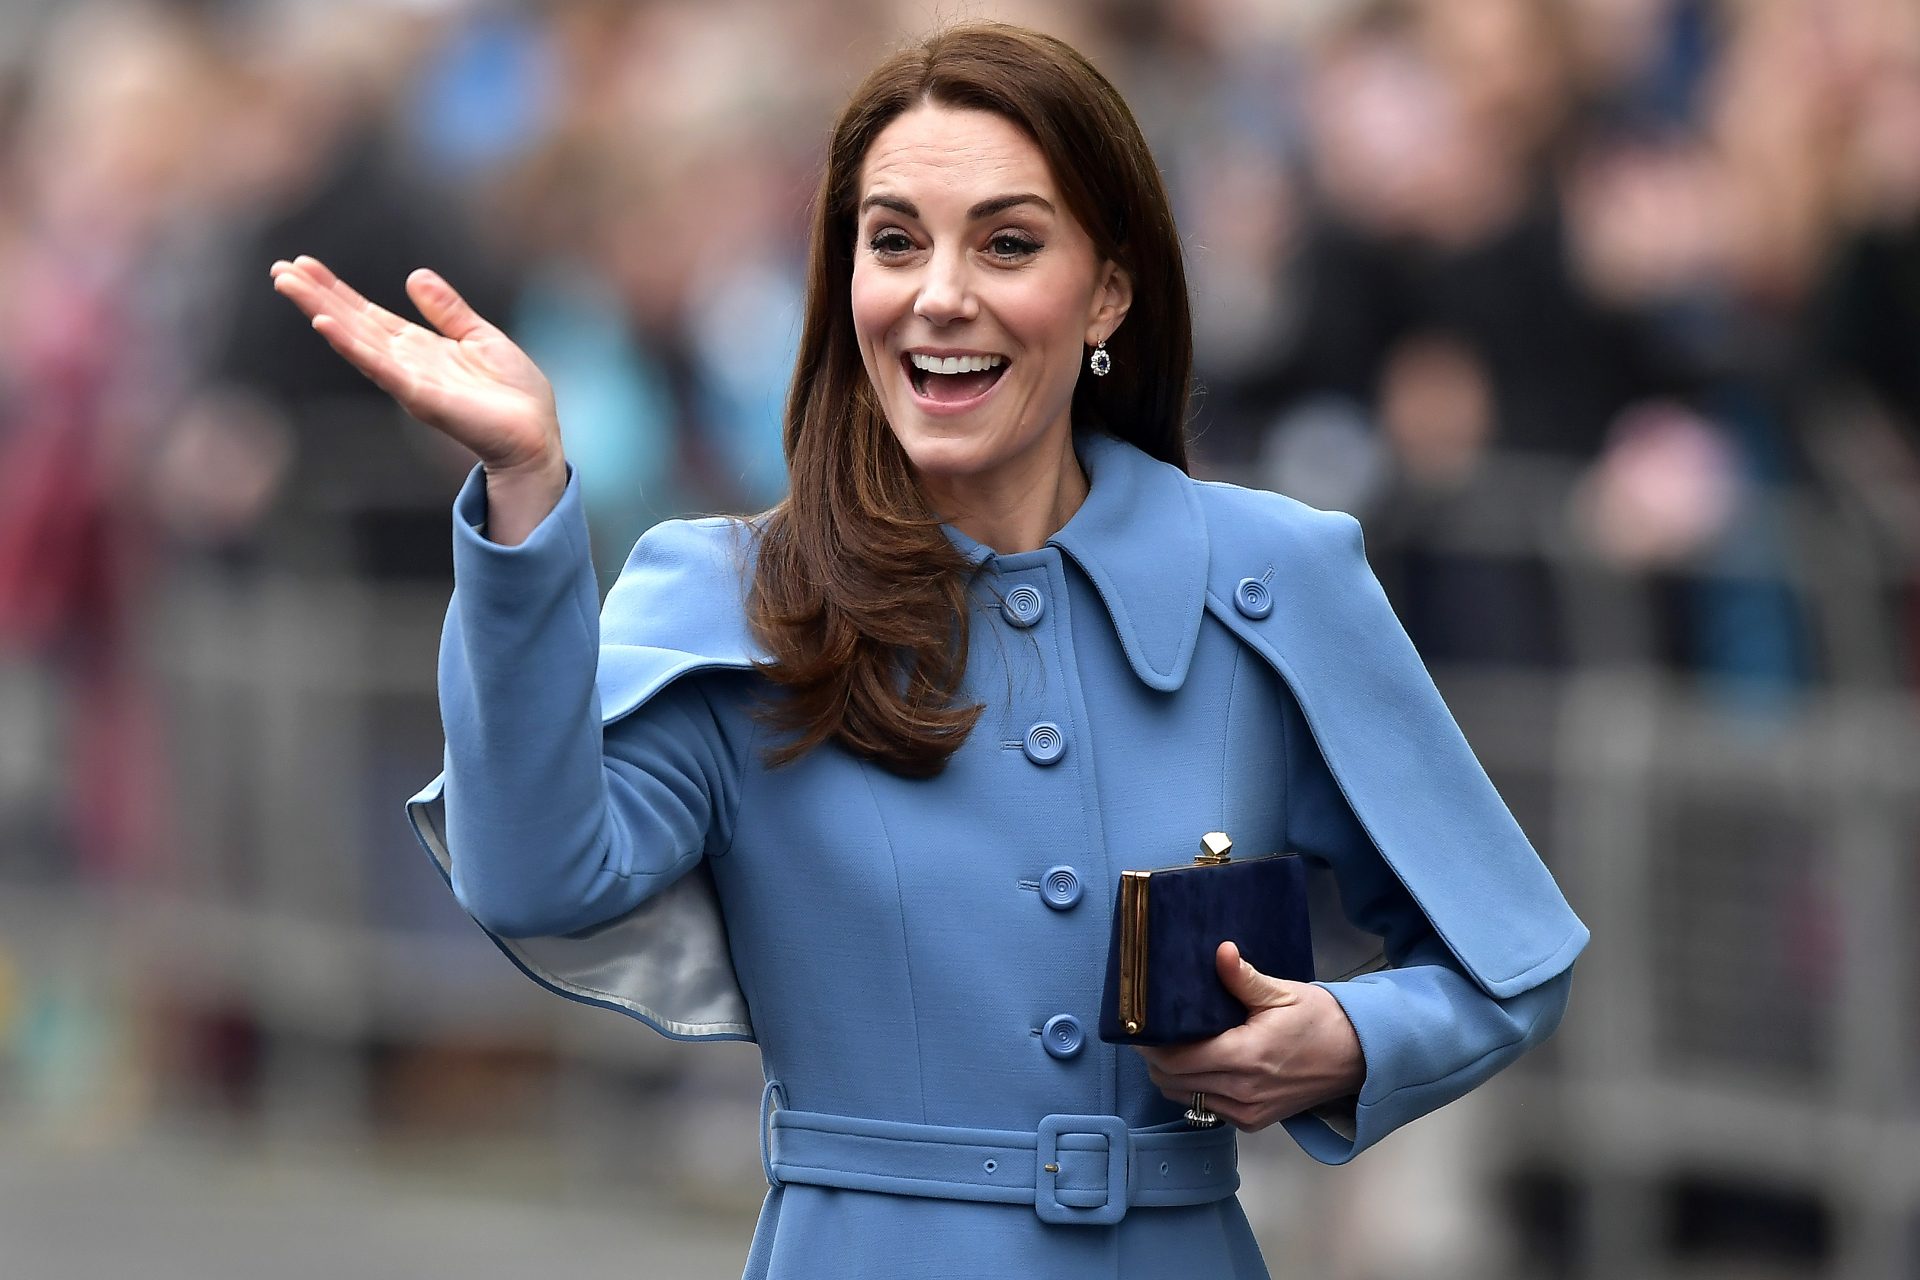 The 'where is Kate Middleton' internet craze